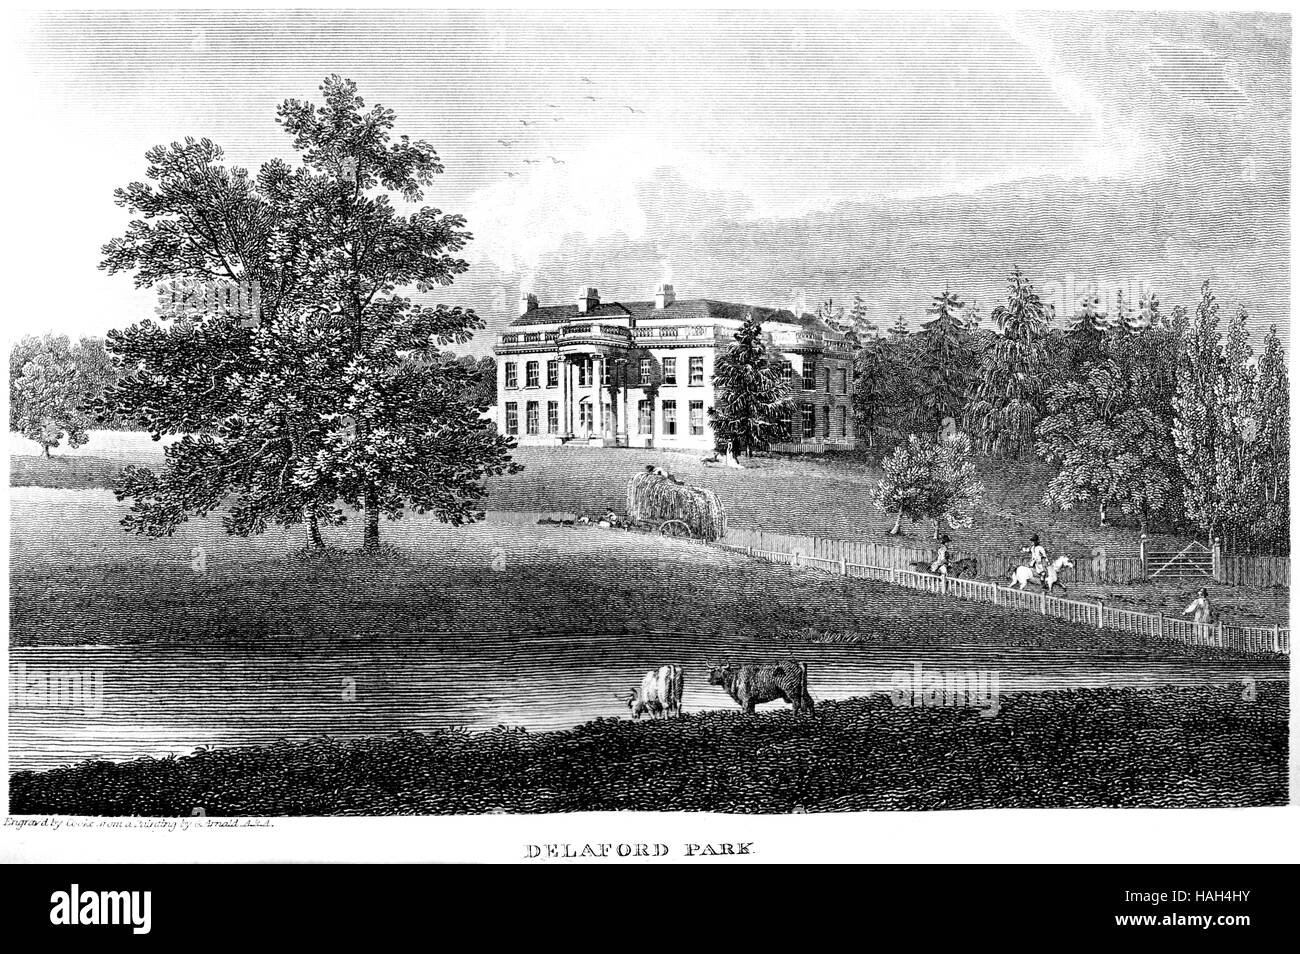 An engraving of Delaford Park scanned at high resolution from a book printed in 1812. Believed copyright free. 1800s farming & agriculture. Stock Photo